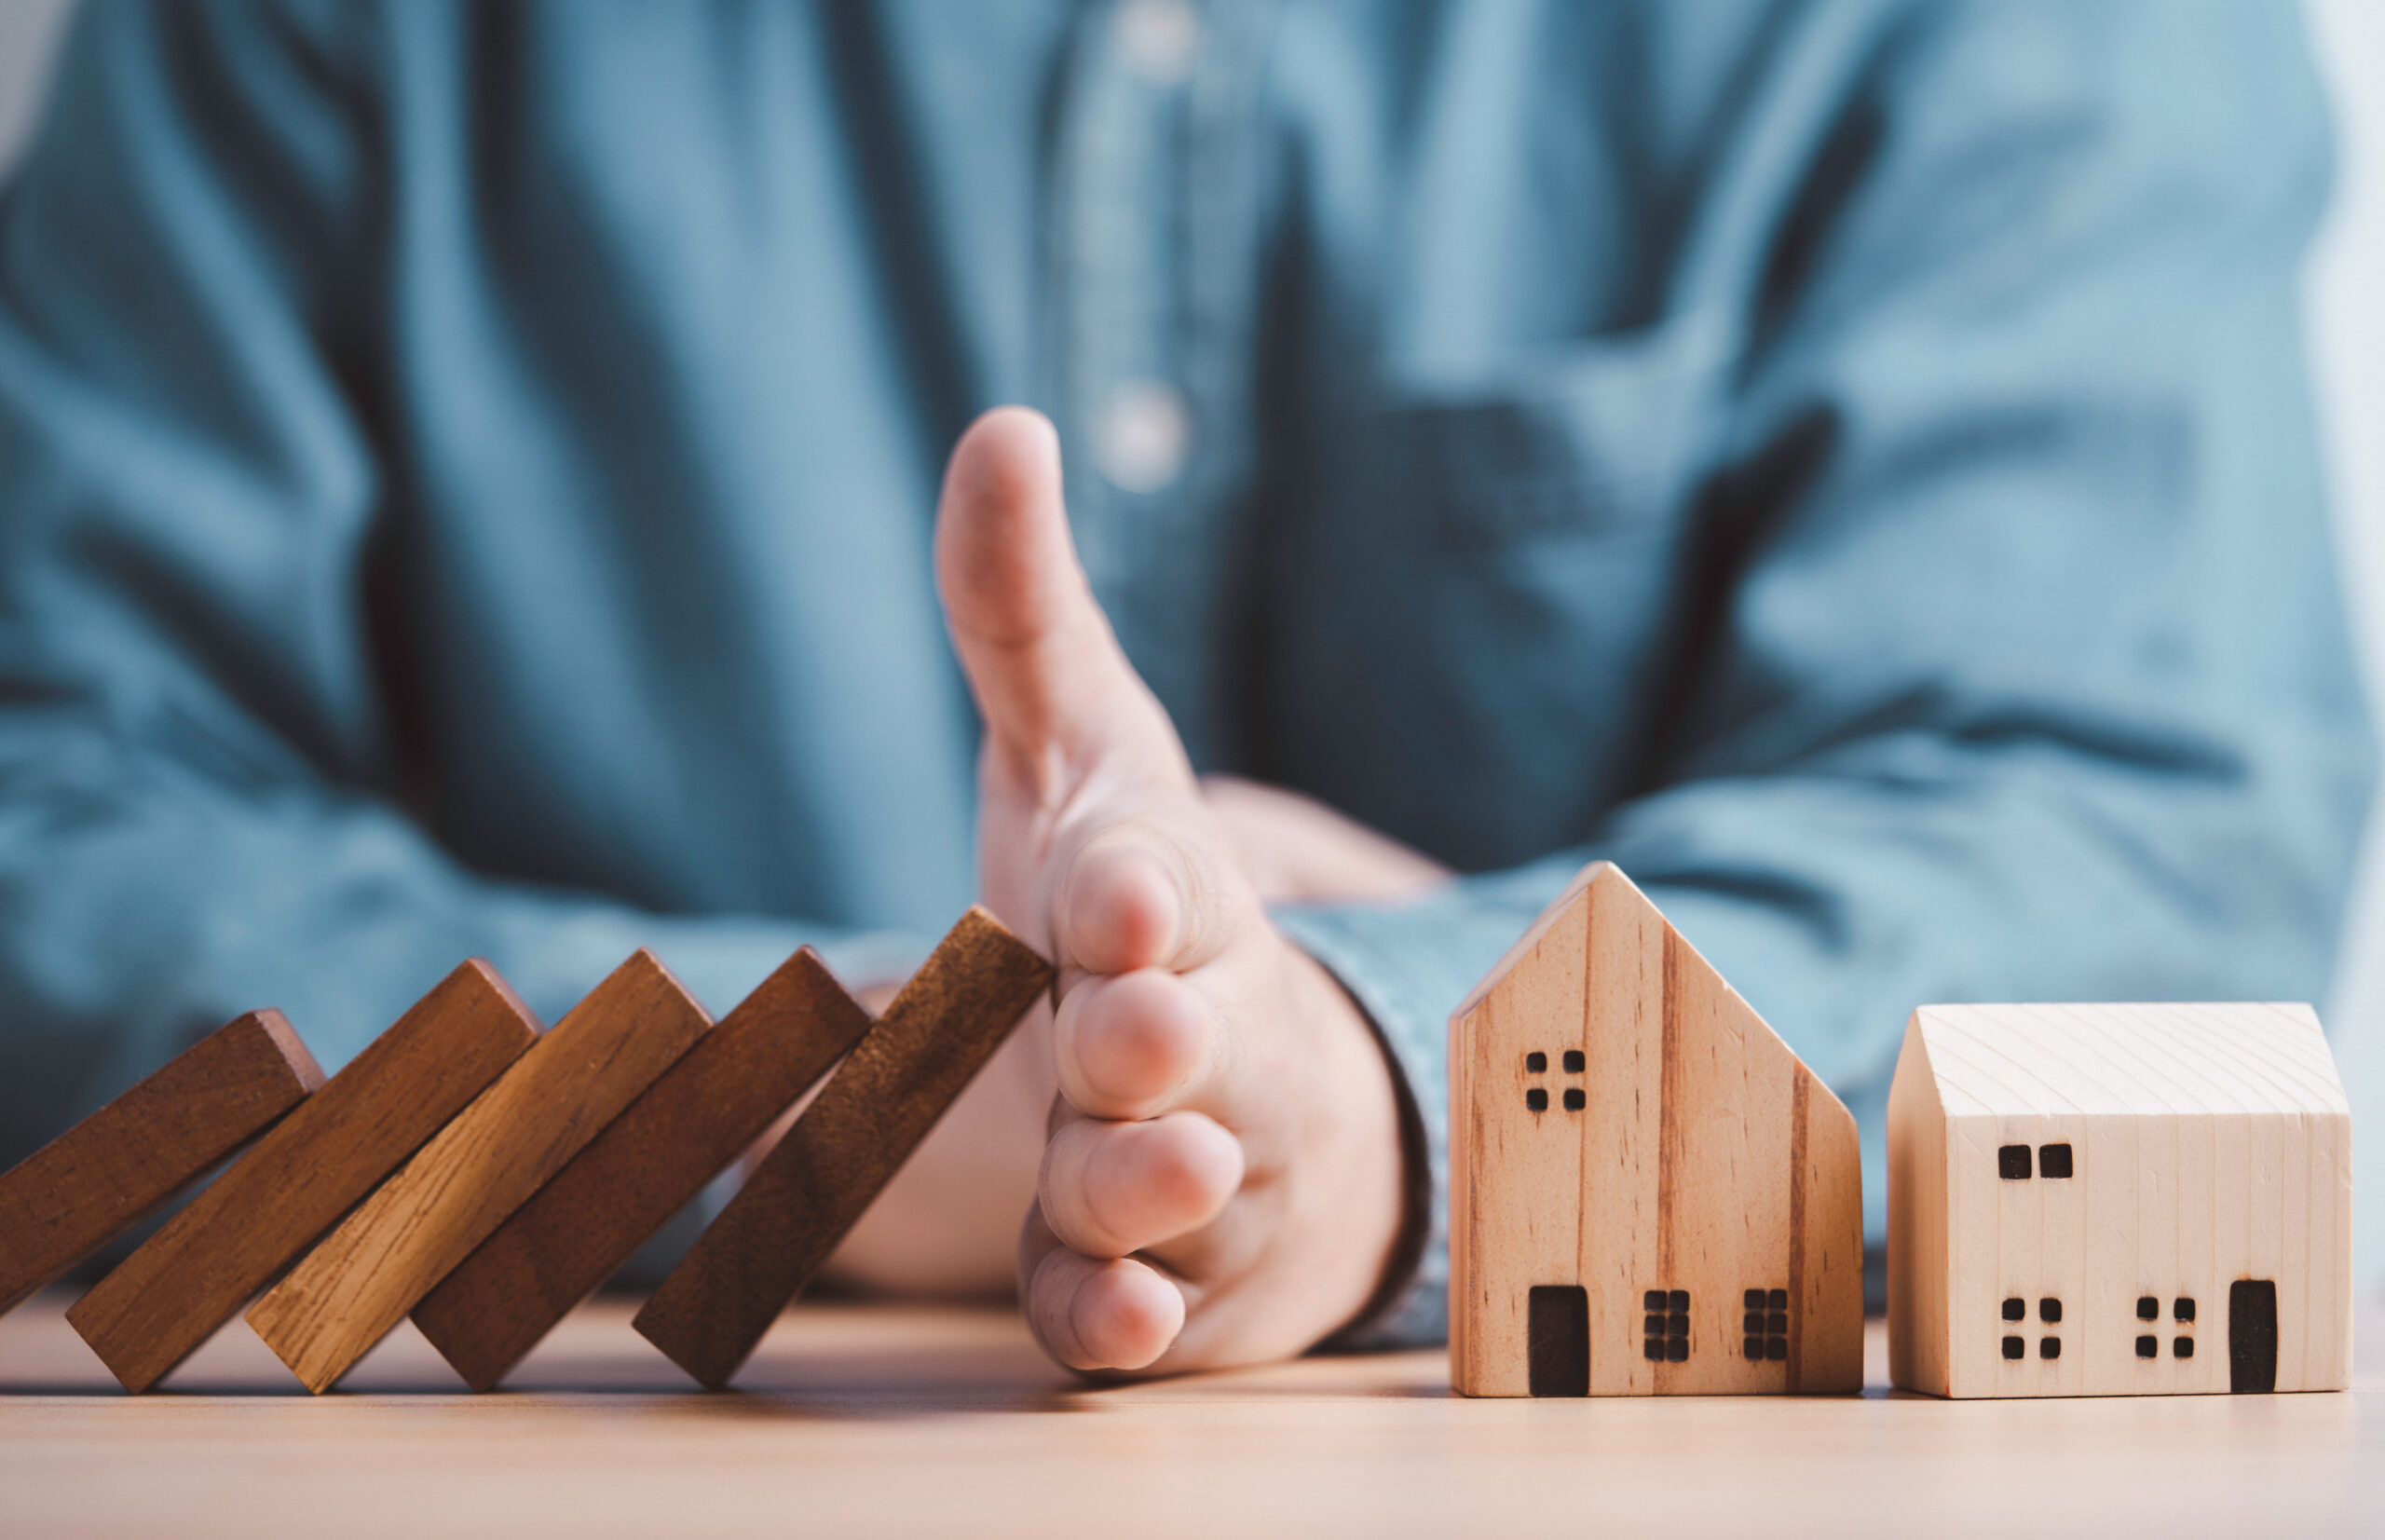 Hand protecting houses from domino falling to exemplify an article about Avoid These 10 Mistakes When Investing in Real Estate - Real Estate Juan Cano, Massachusetts